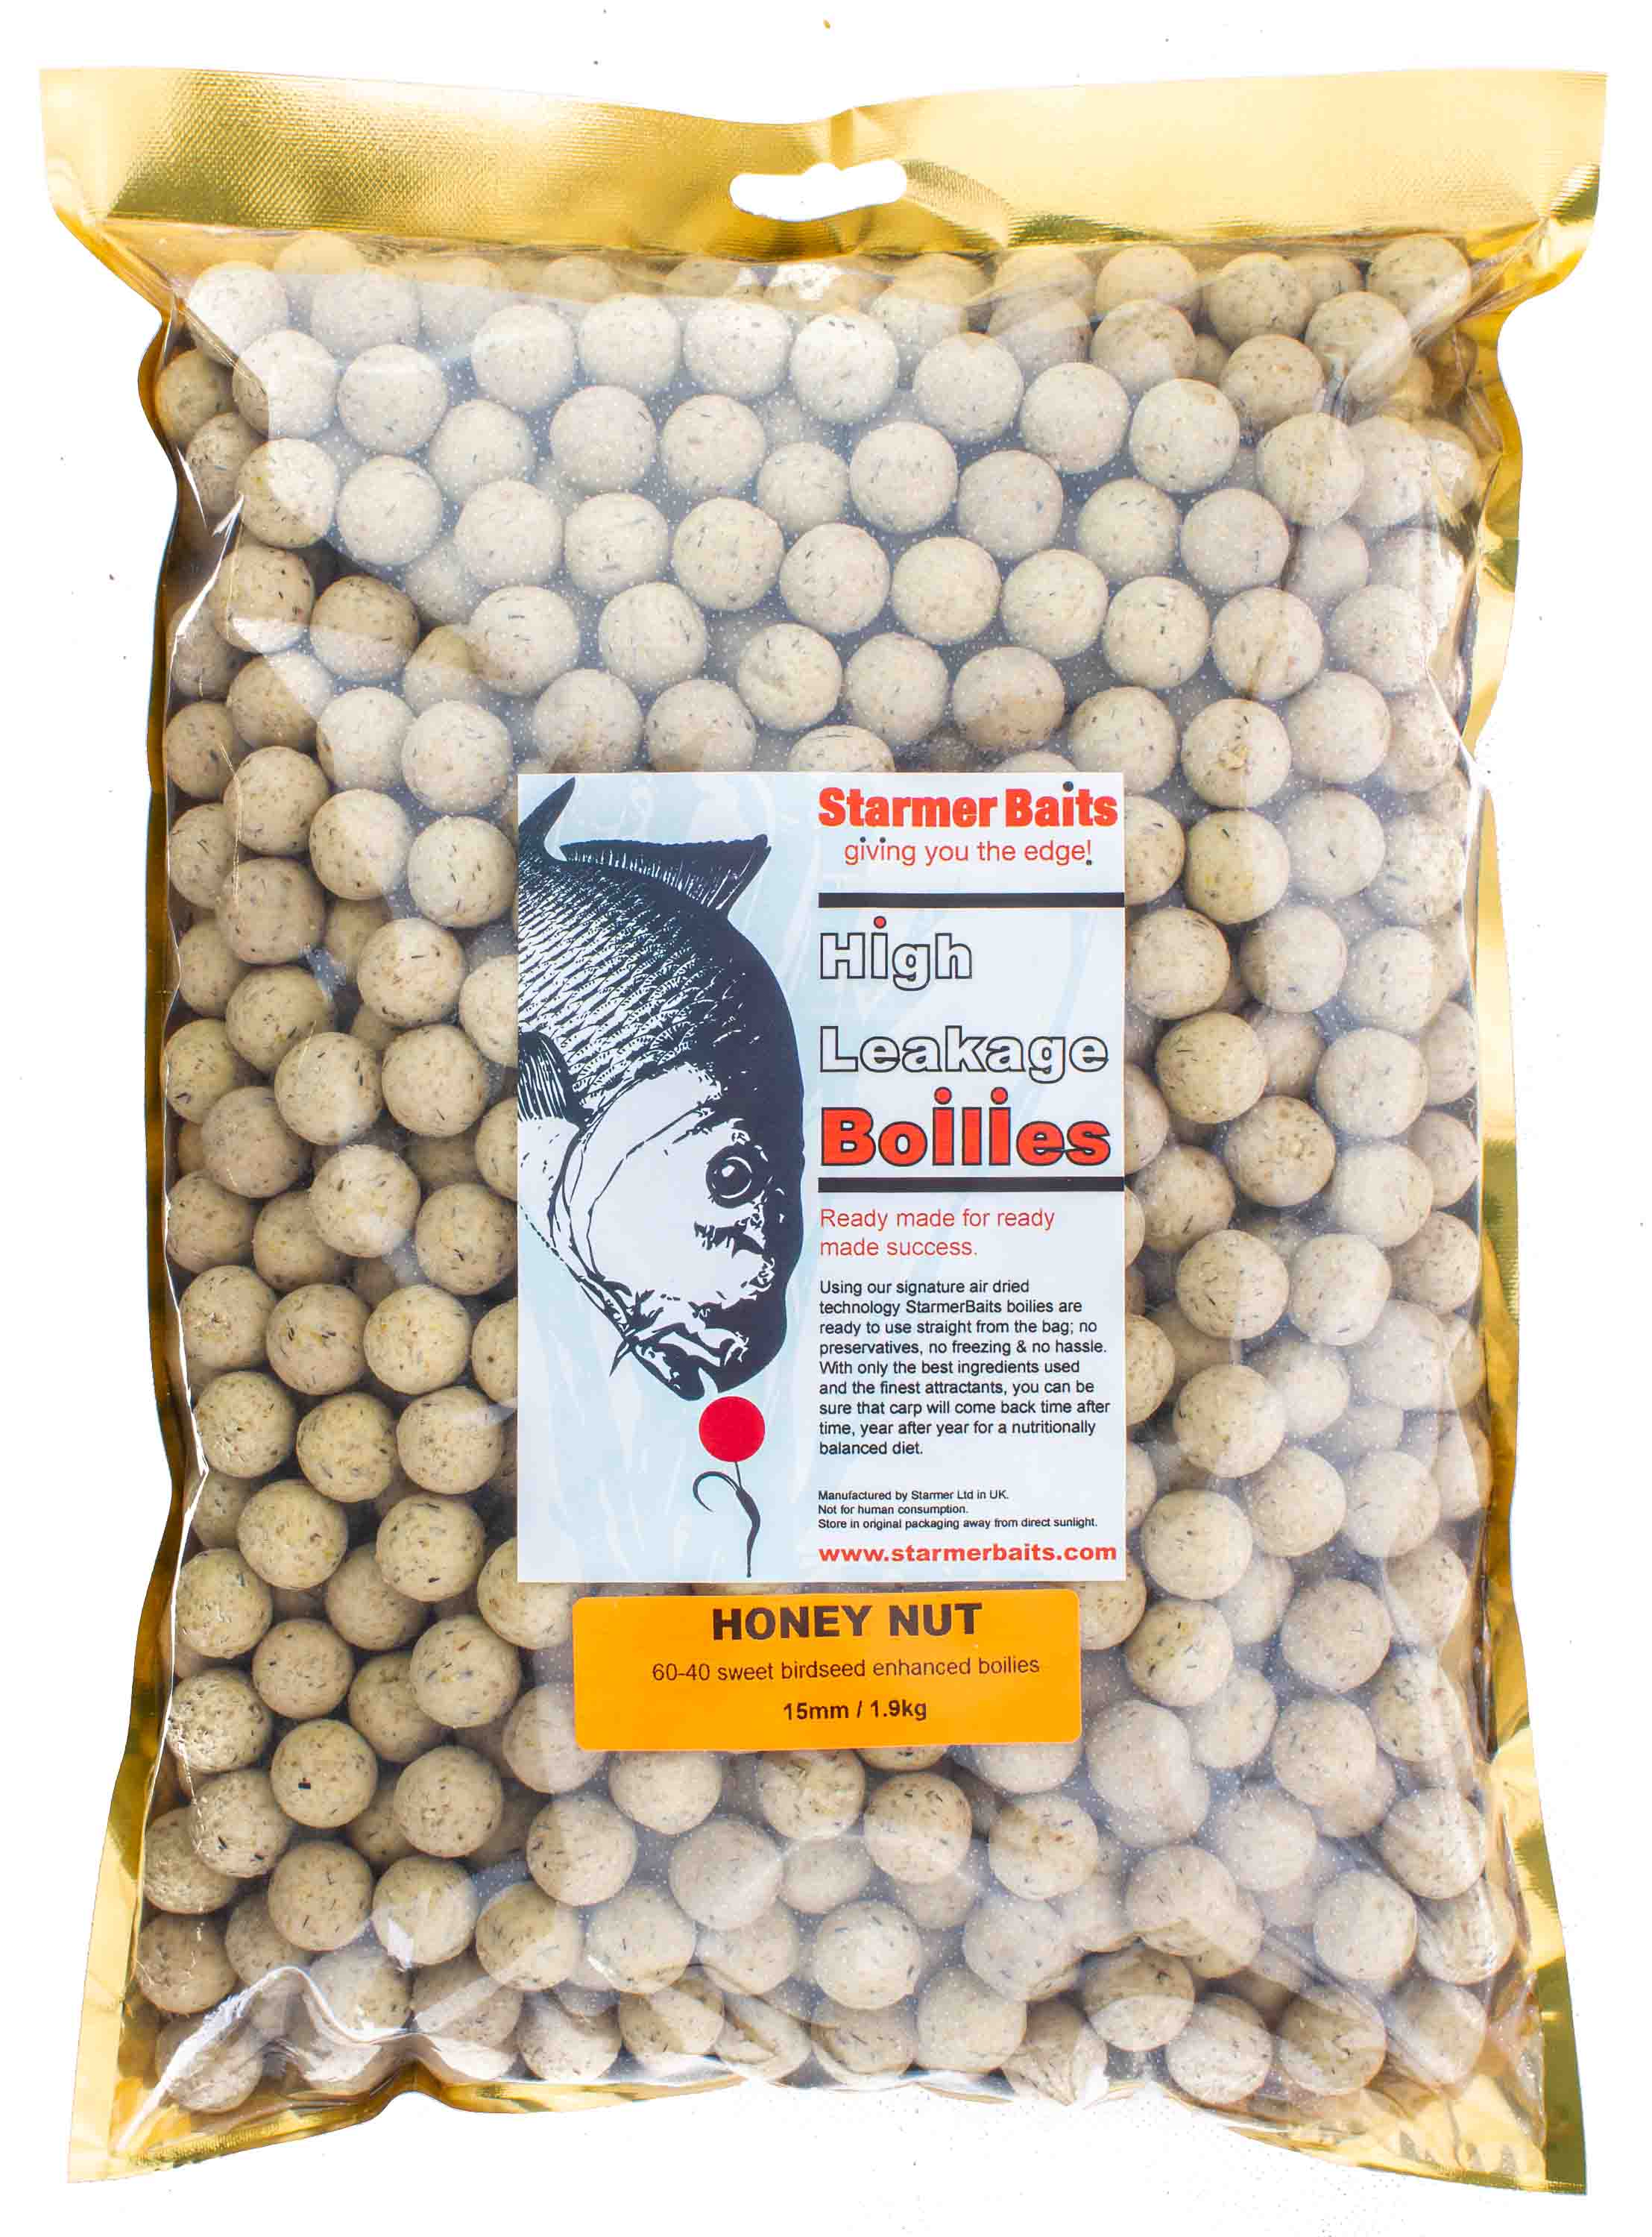 White Chocolate Bandable Hard Red Hook Bait Pellets 8MM 80G Course Carp Match 